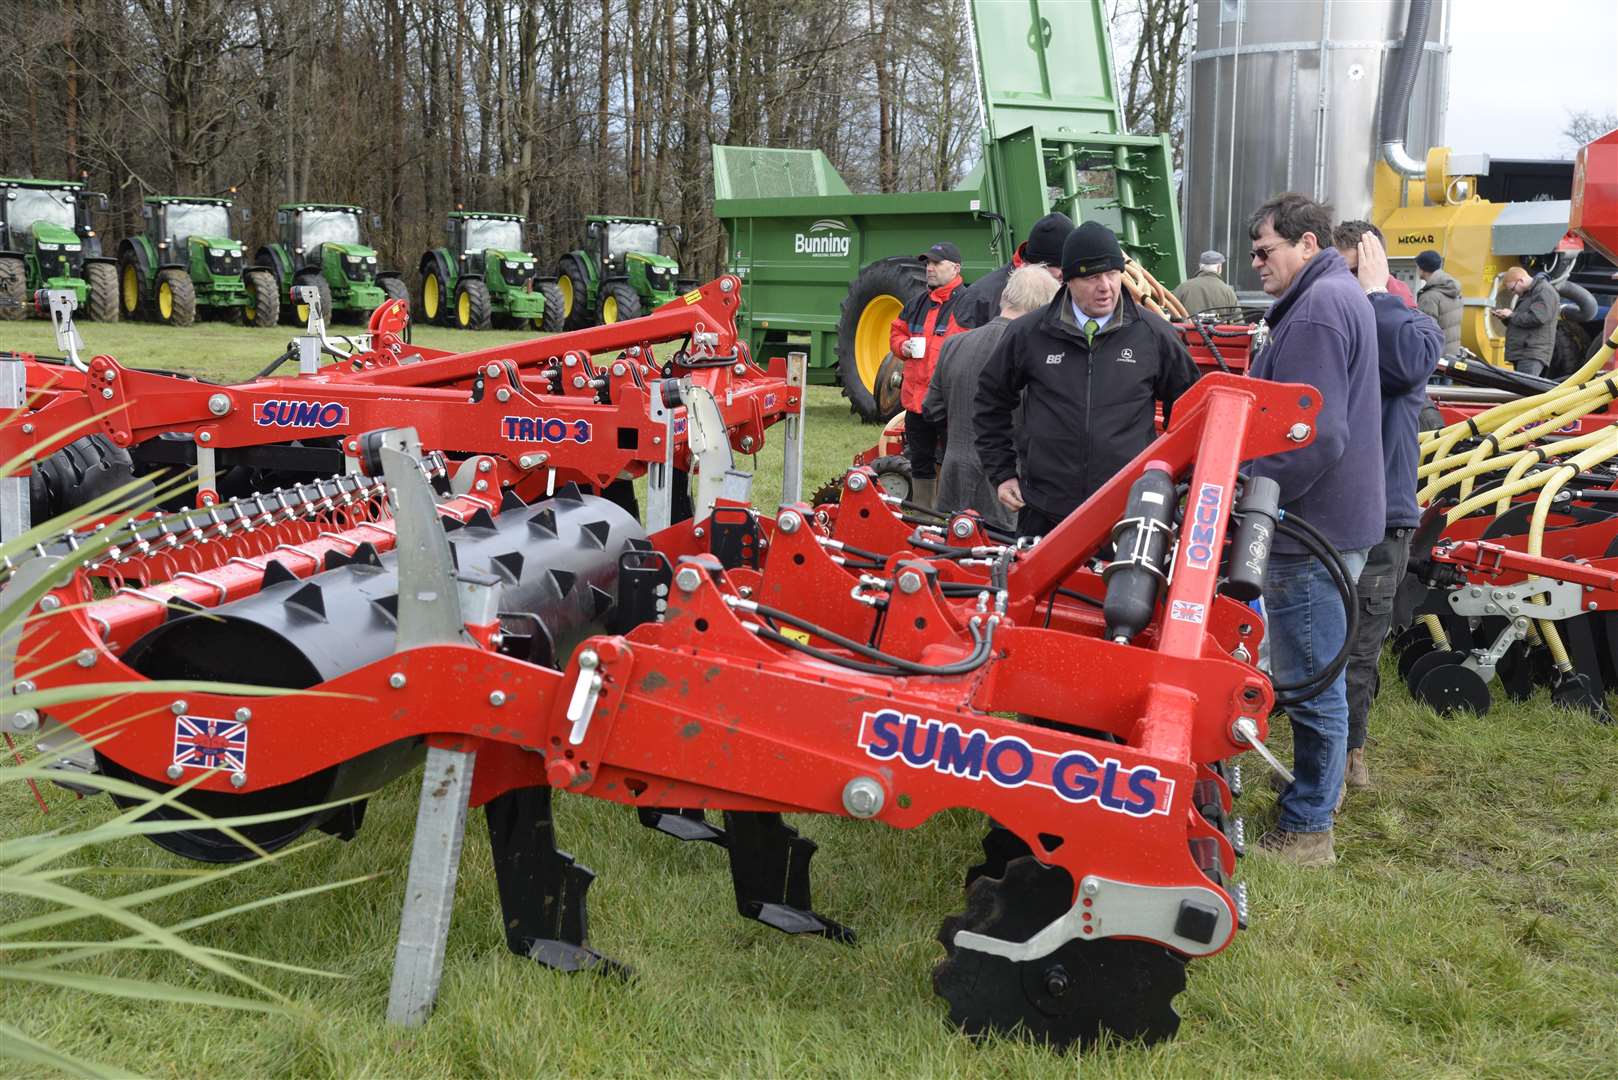 Farm Expo replaces the Agri Expo event which cancelled this year, citing a high price hike in the cost of hosting the event at the Kent Showground